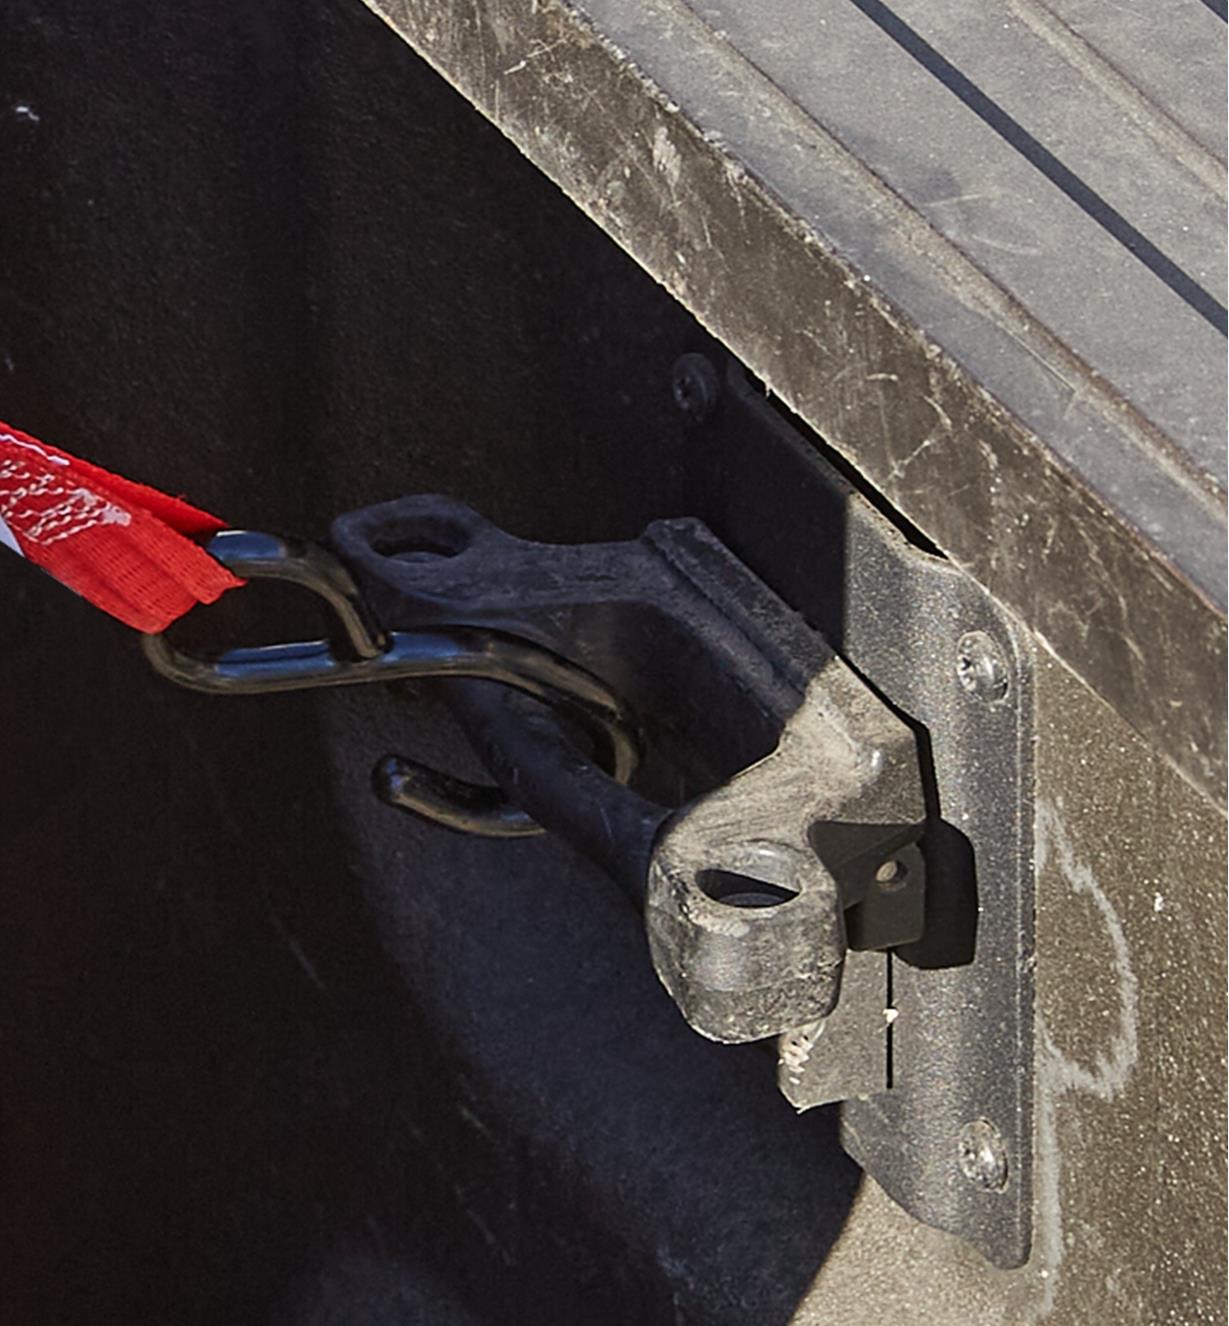 The hook on the end of a Quickloader ratchet strap attached to an anchor point on a pickup truck bed